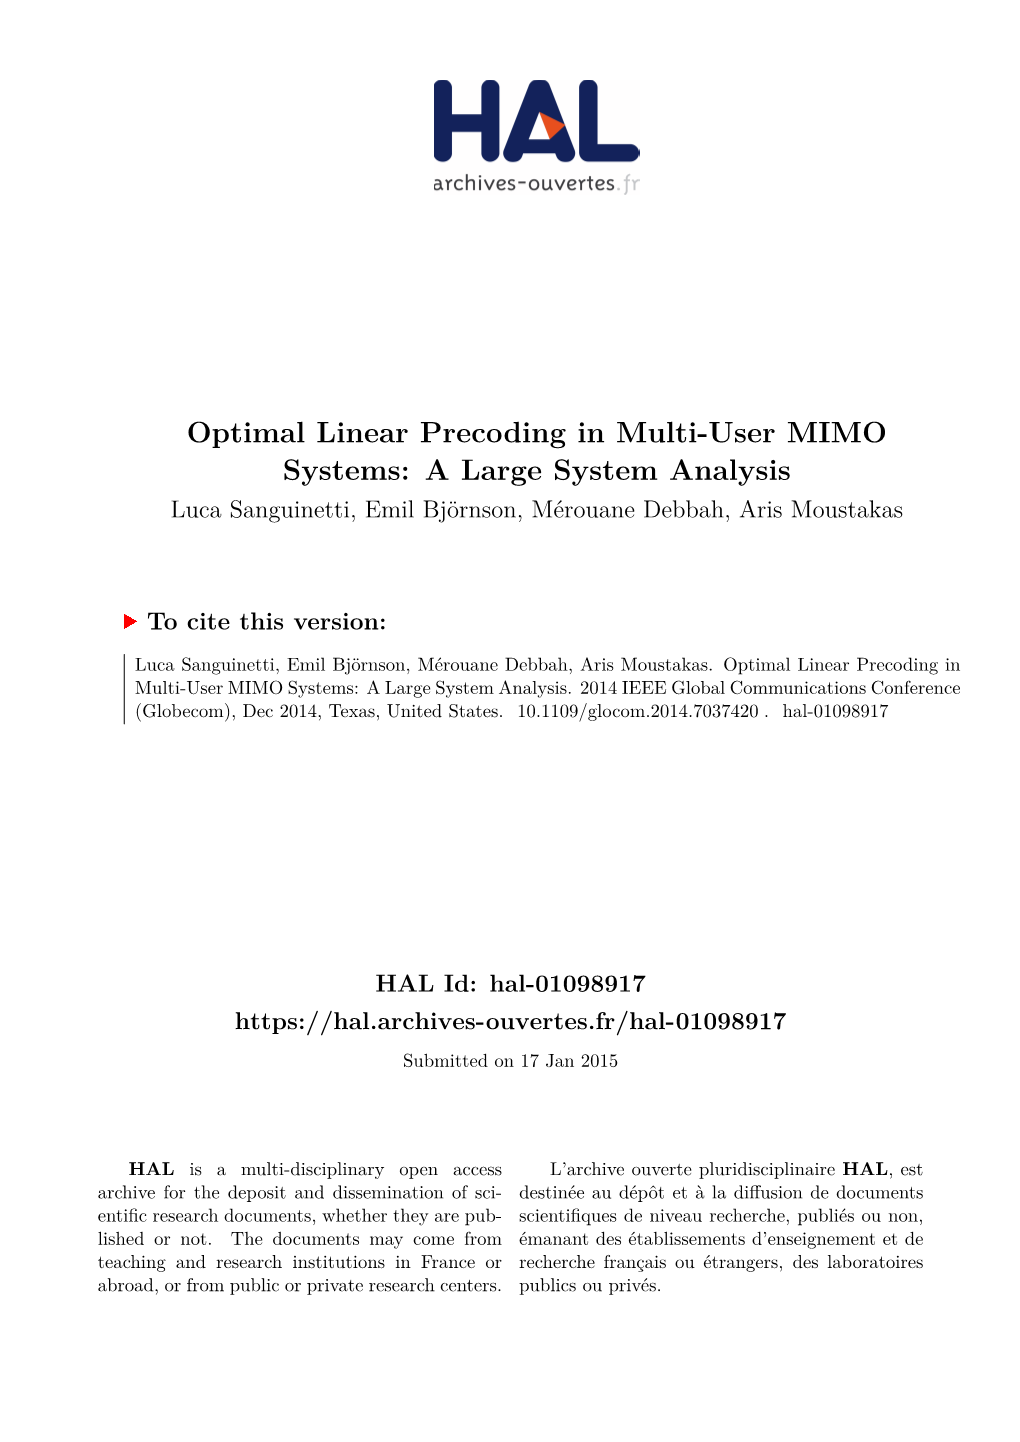 Optimal Linear Precoding in Multi-User MIMO Systems: a Large System Analysis Luca Sanguinetti, Emil Björnson, Mérouane Debbah, Aris Moustakas